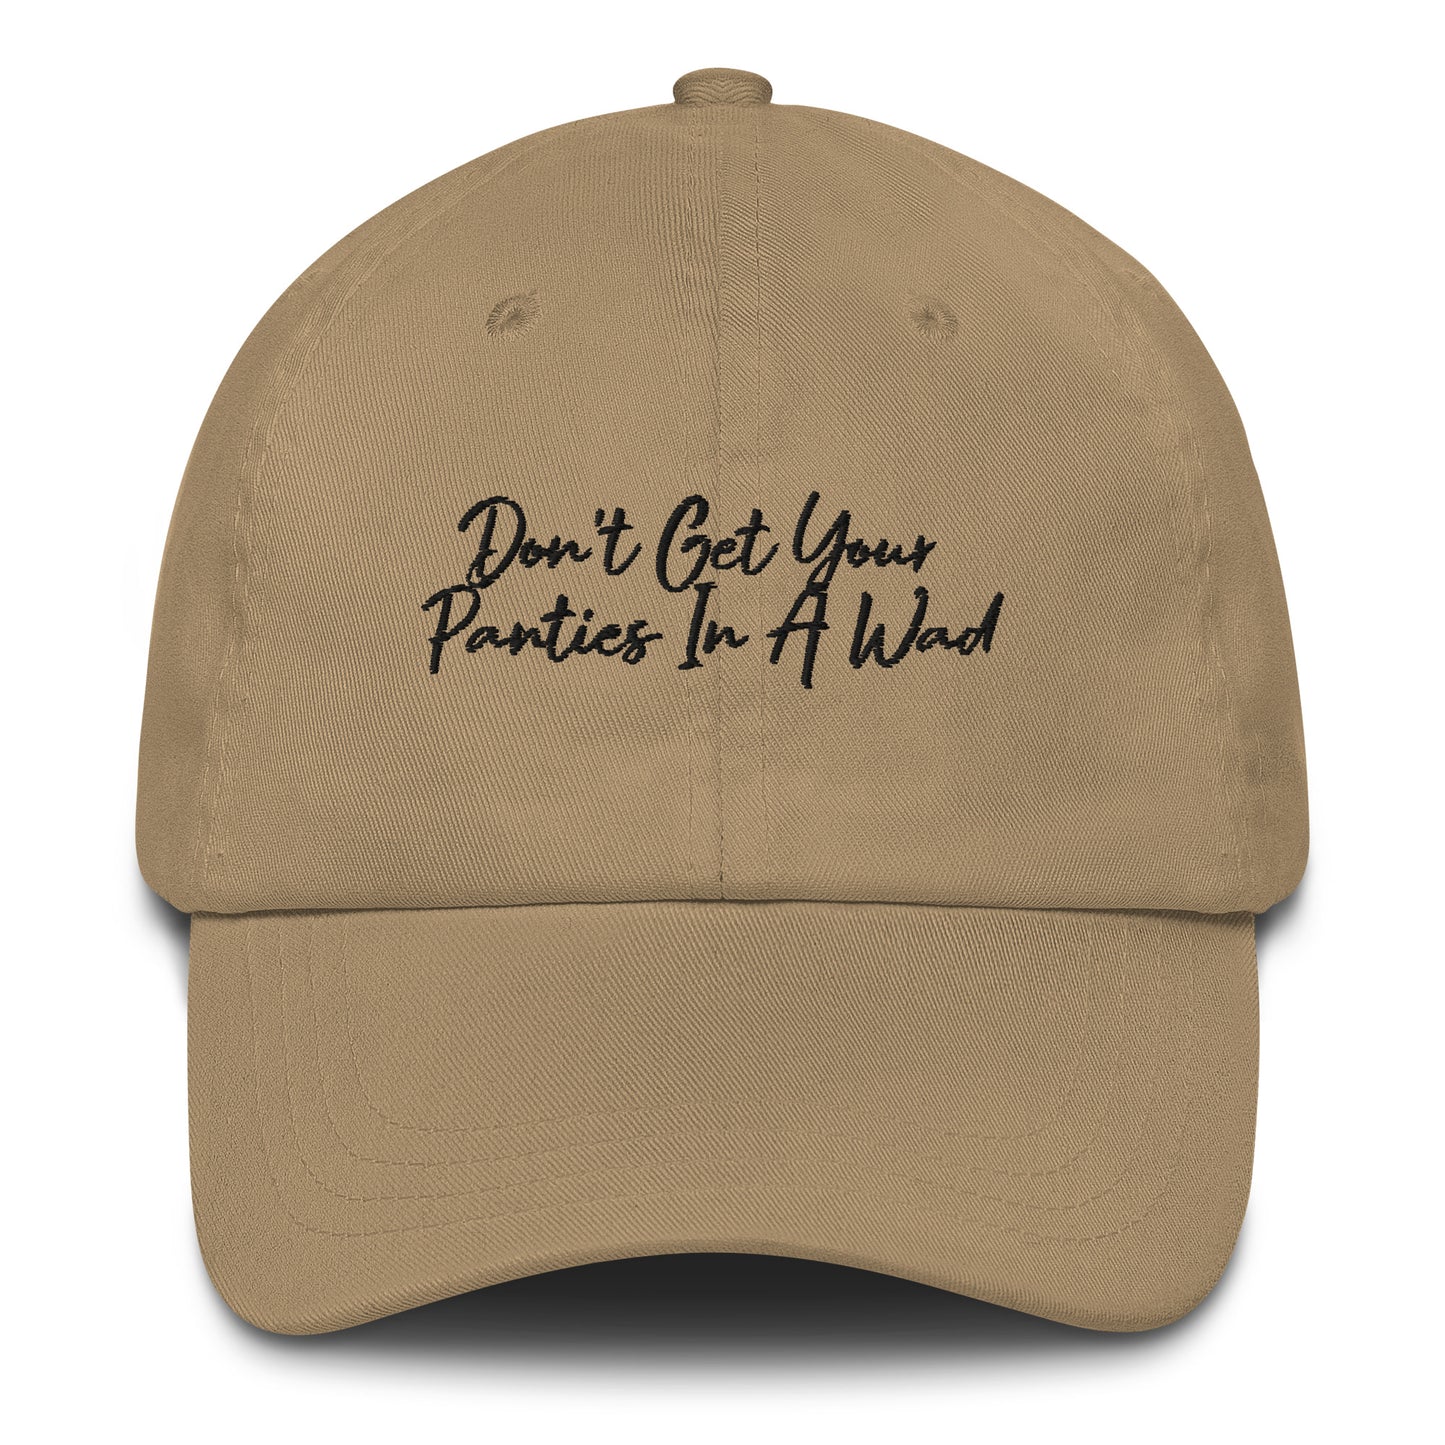 "Panties in a Wad" Dad hat